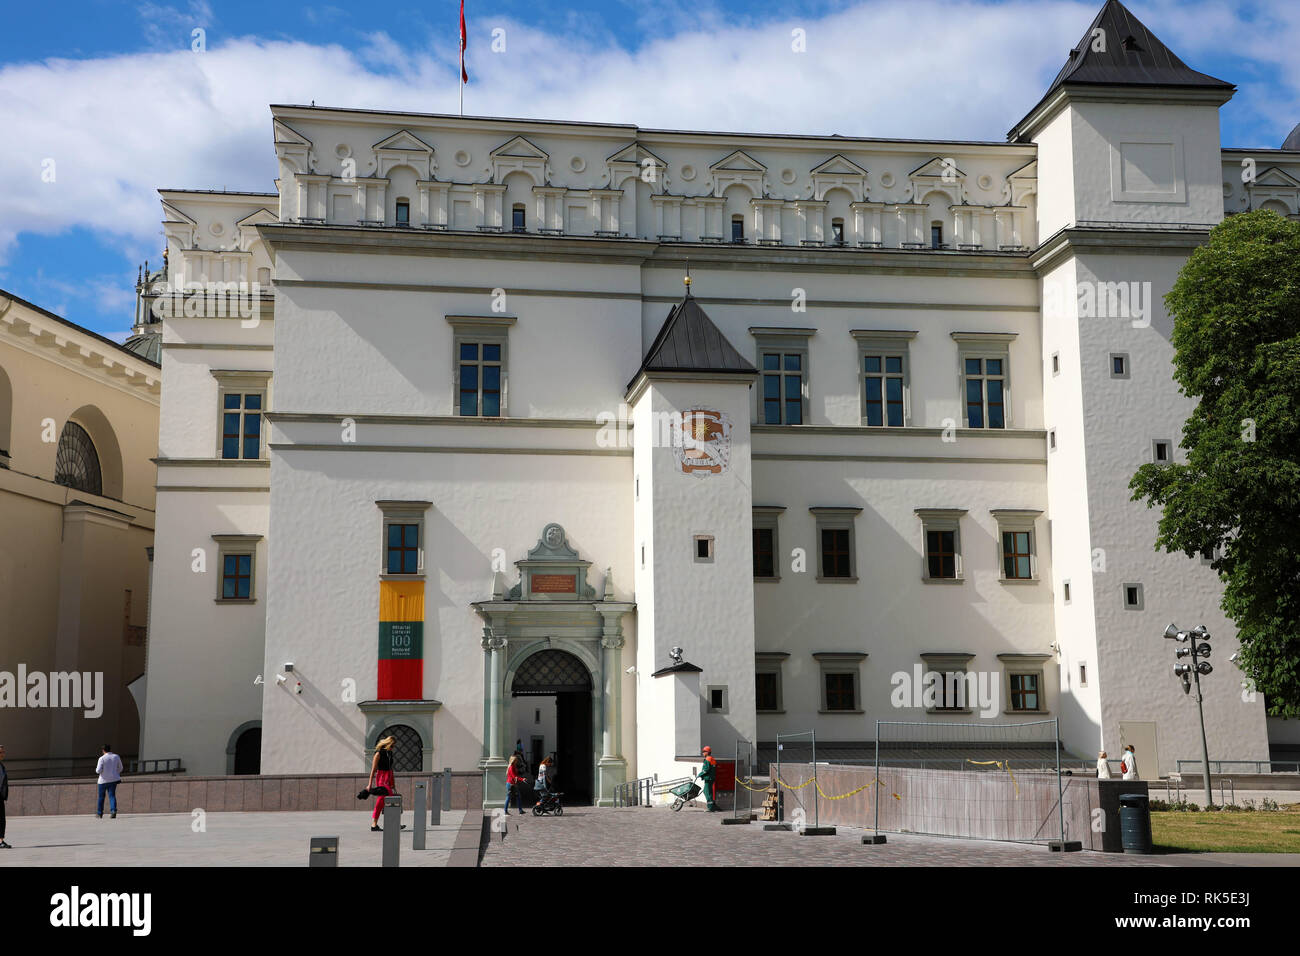 VILNIUS, LITHUANIA, JUNE 7, 2018: Palace of The Grand Dukes of Lithuania and National Museum in Vilnius, Lithuania Stock Photo